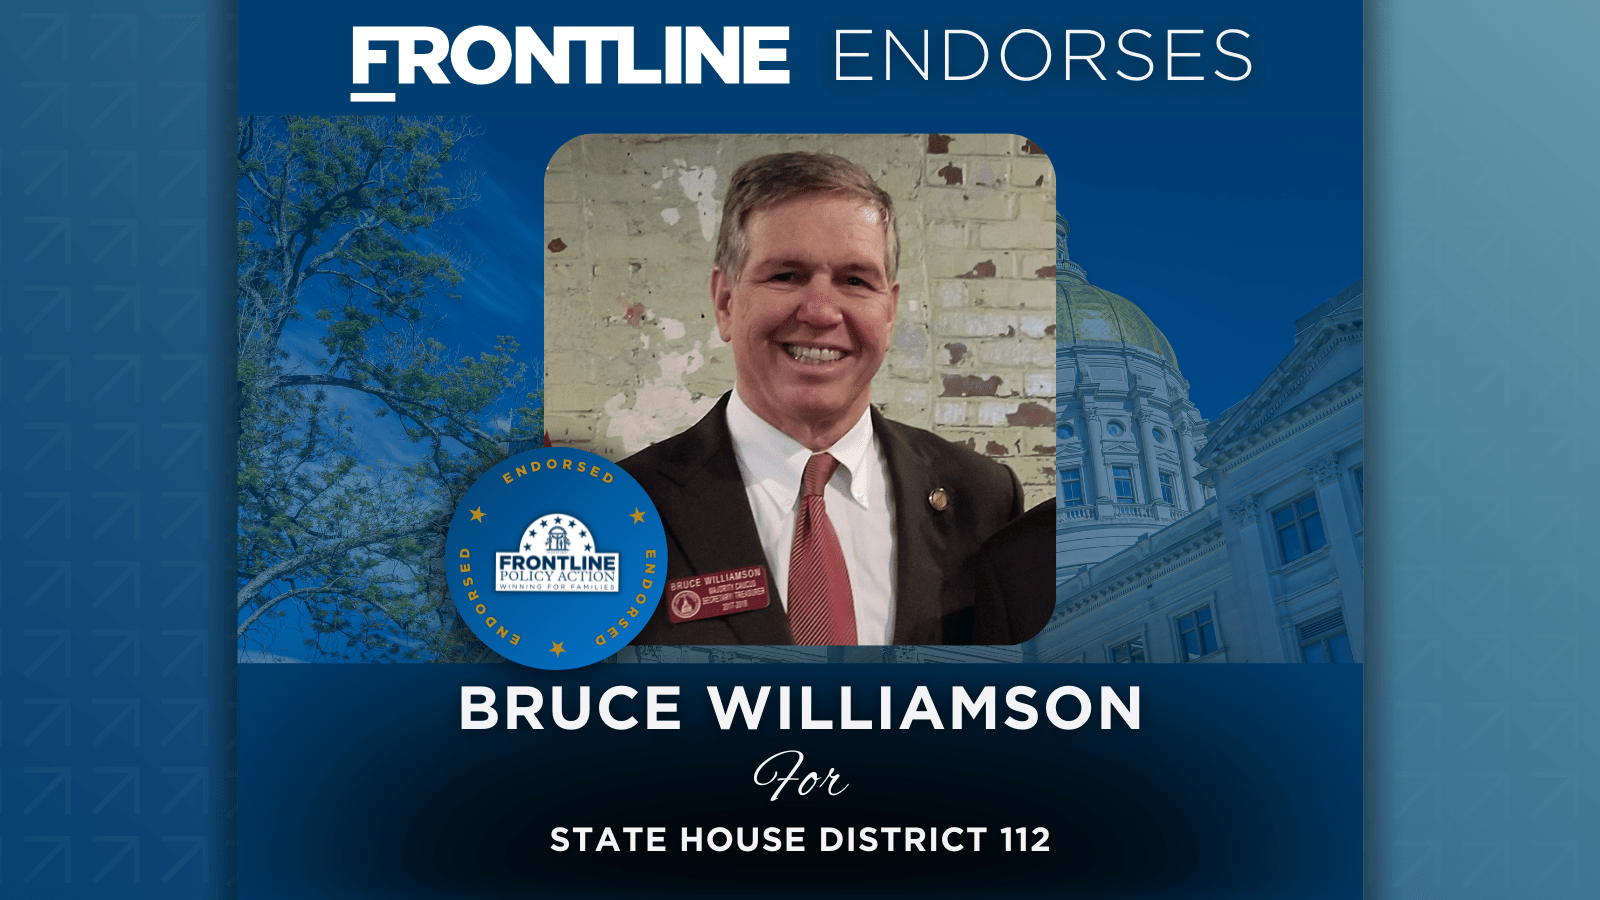 BREAKING: Frontline Endorses Bruce Williamson for State House District 112